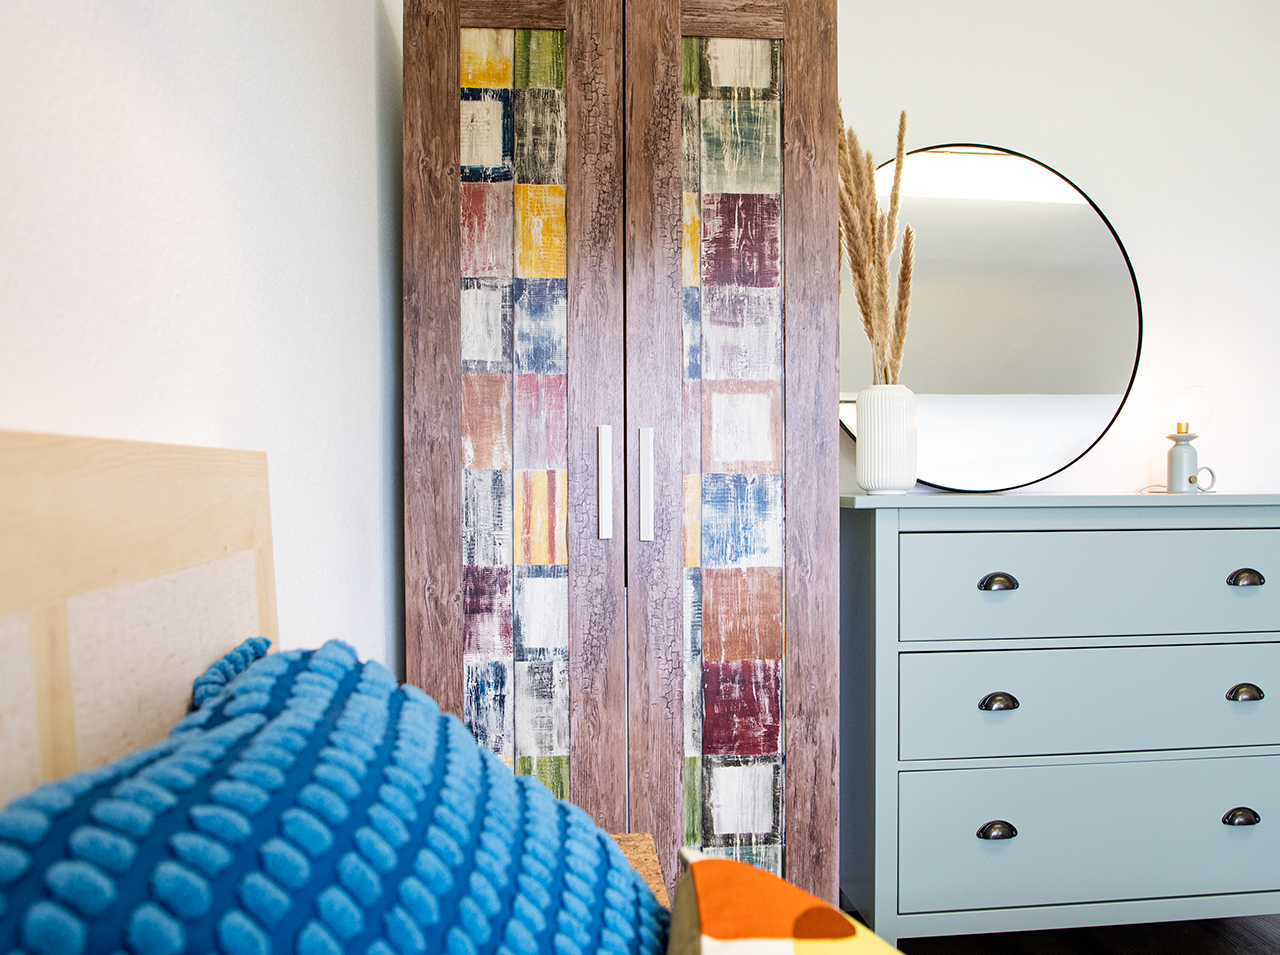 Doors of closet pasted with adhesive foils in colorful vintage look and wood look similar to a beach house.